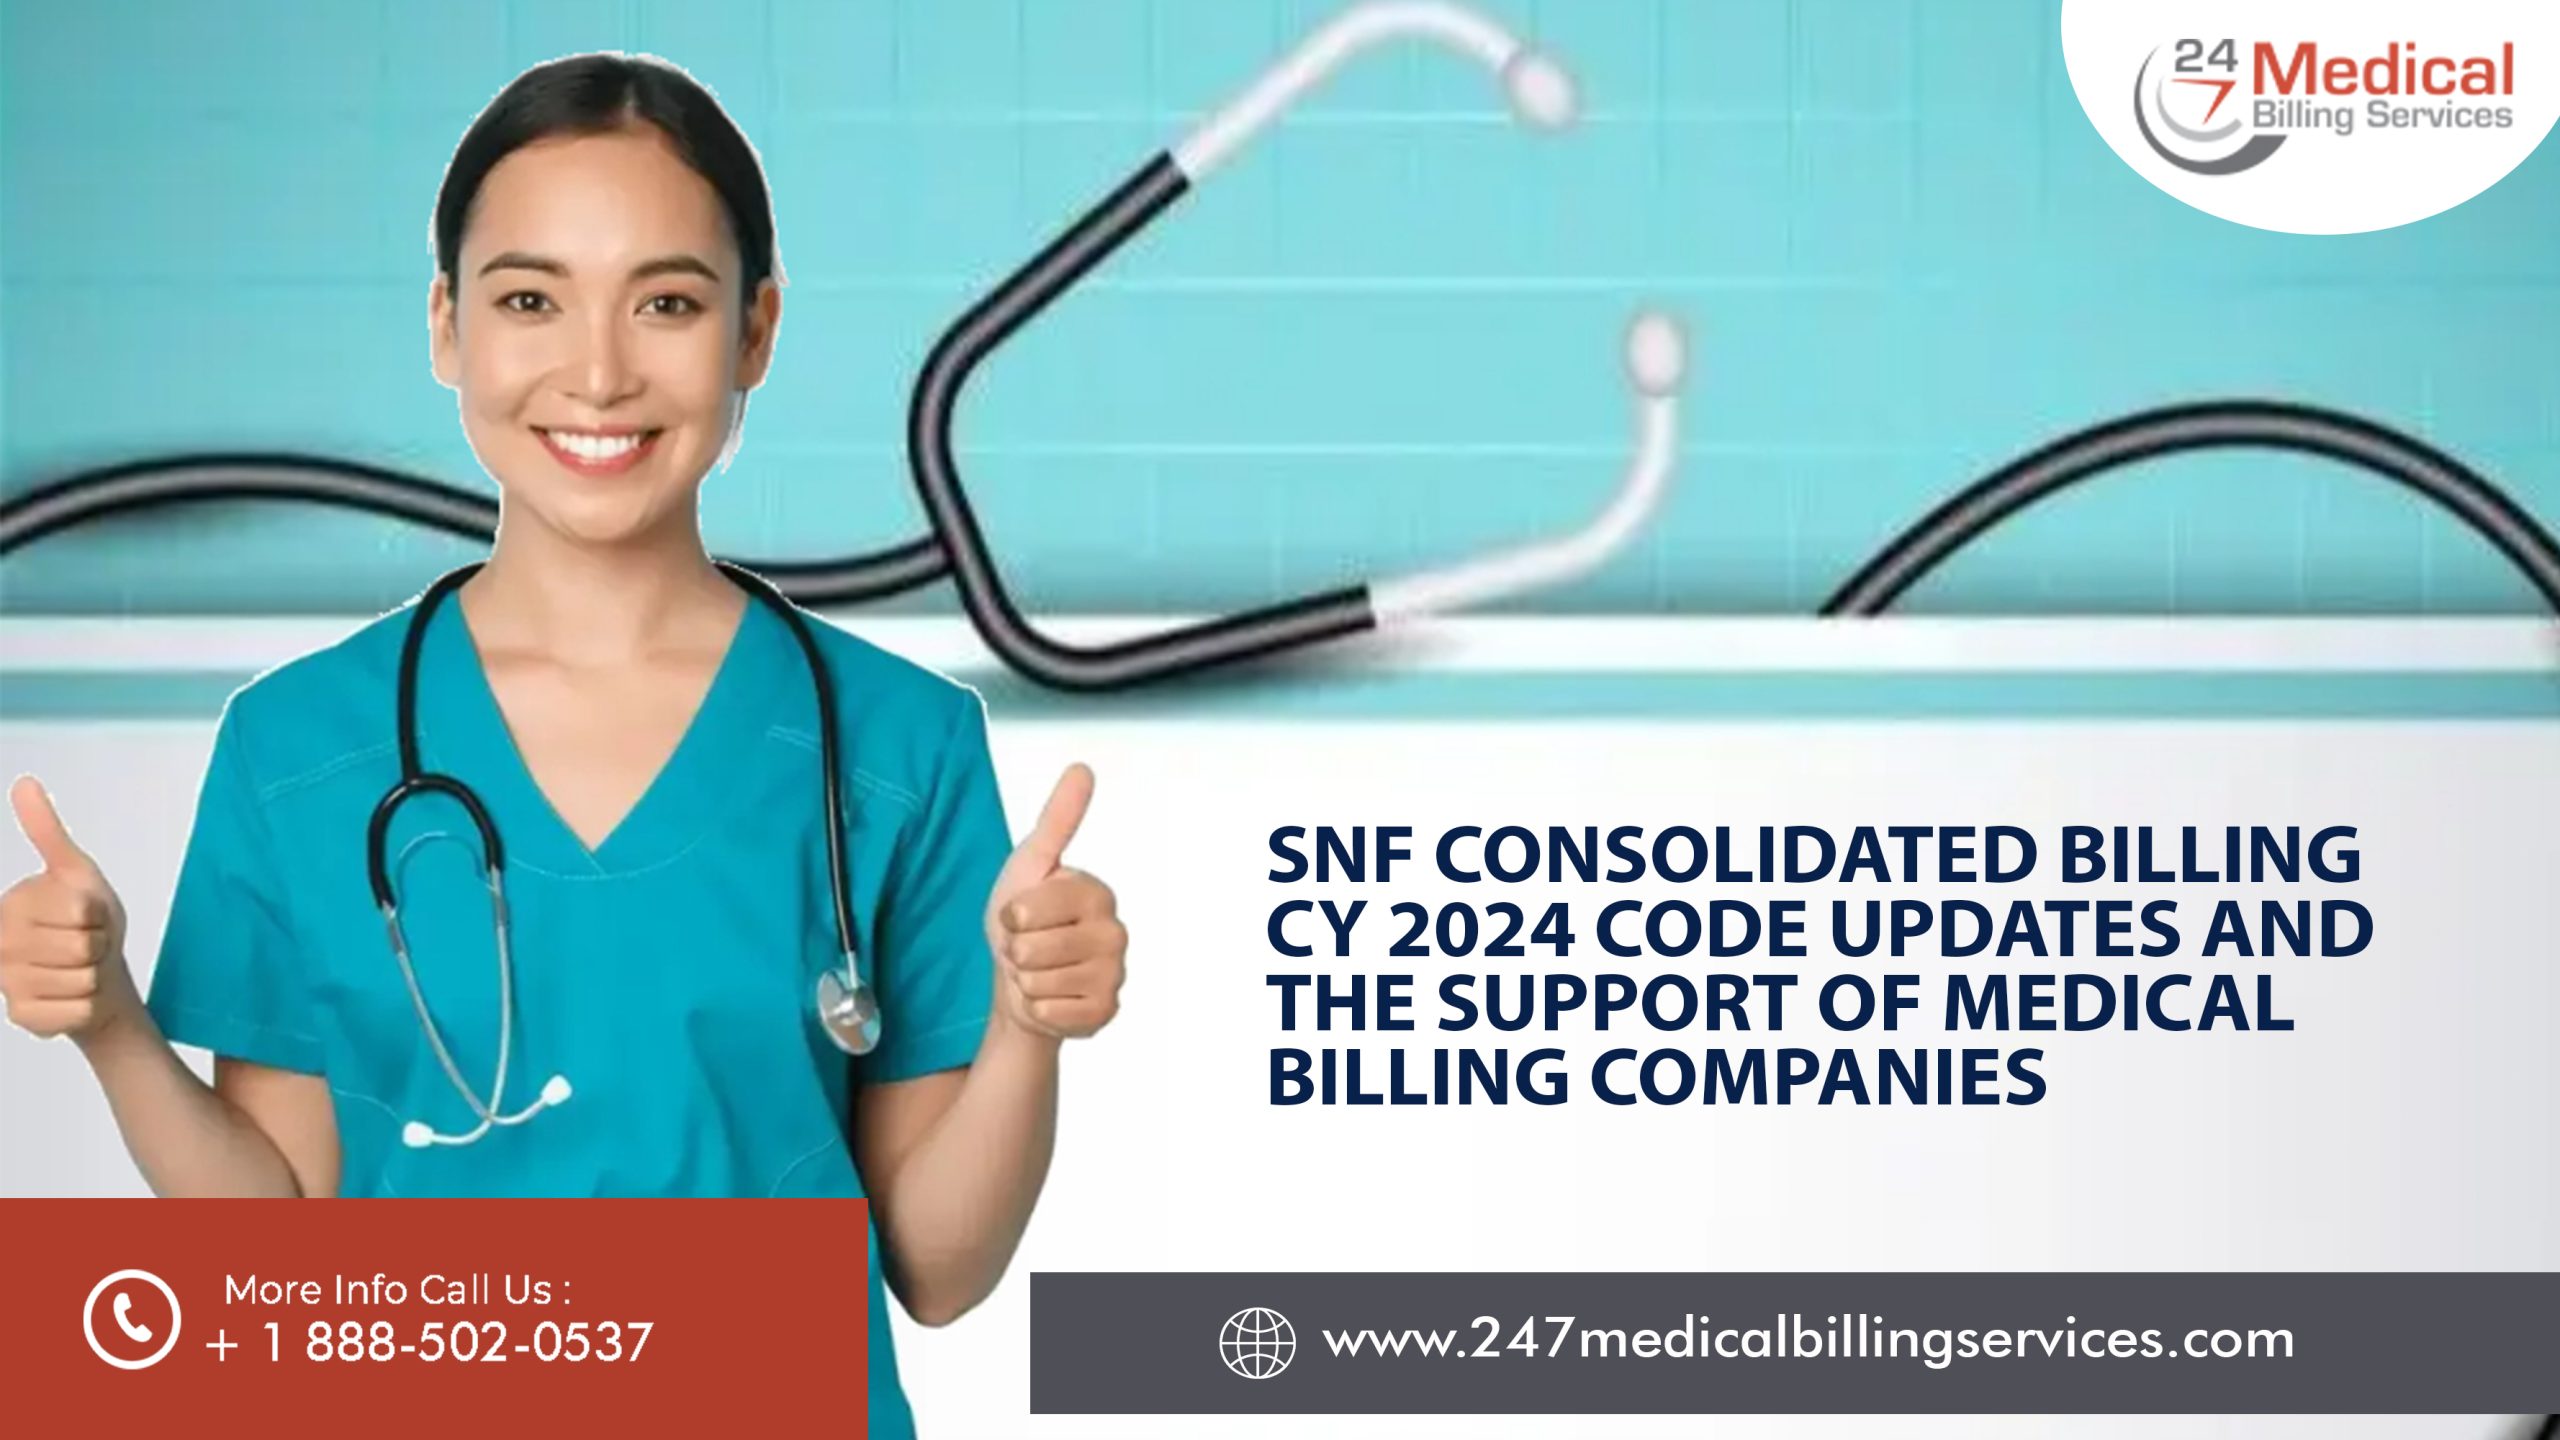  SNF Consolidated Billing CY 2024 Code Updates and the Support of Medical Billing Companies